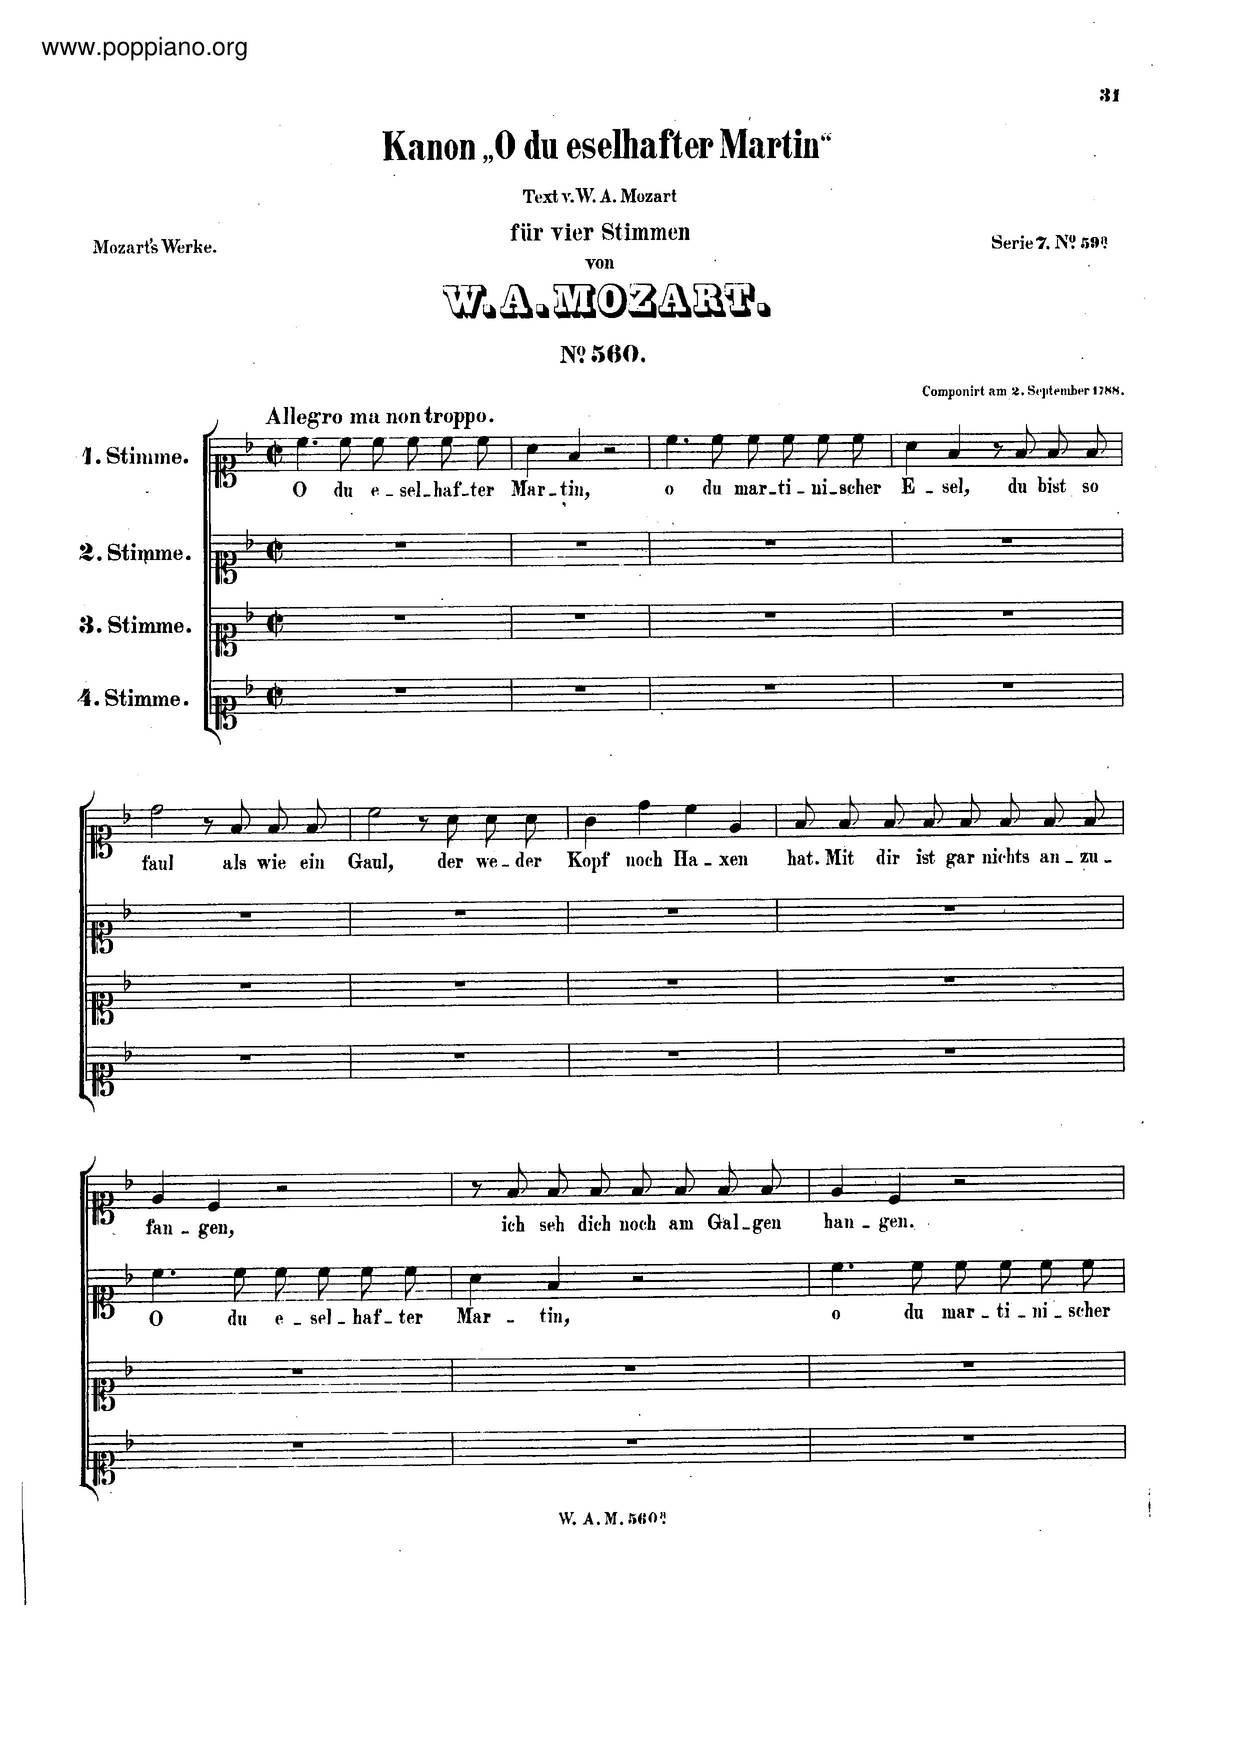 Canon For 4 Voices In F Major, K. 560 Score